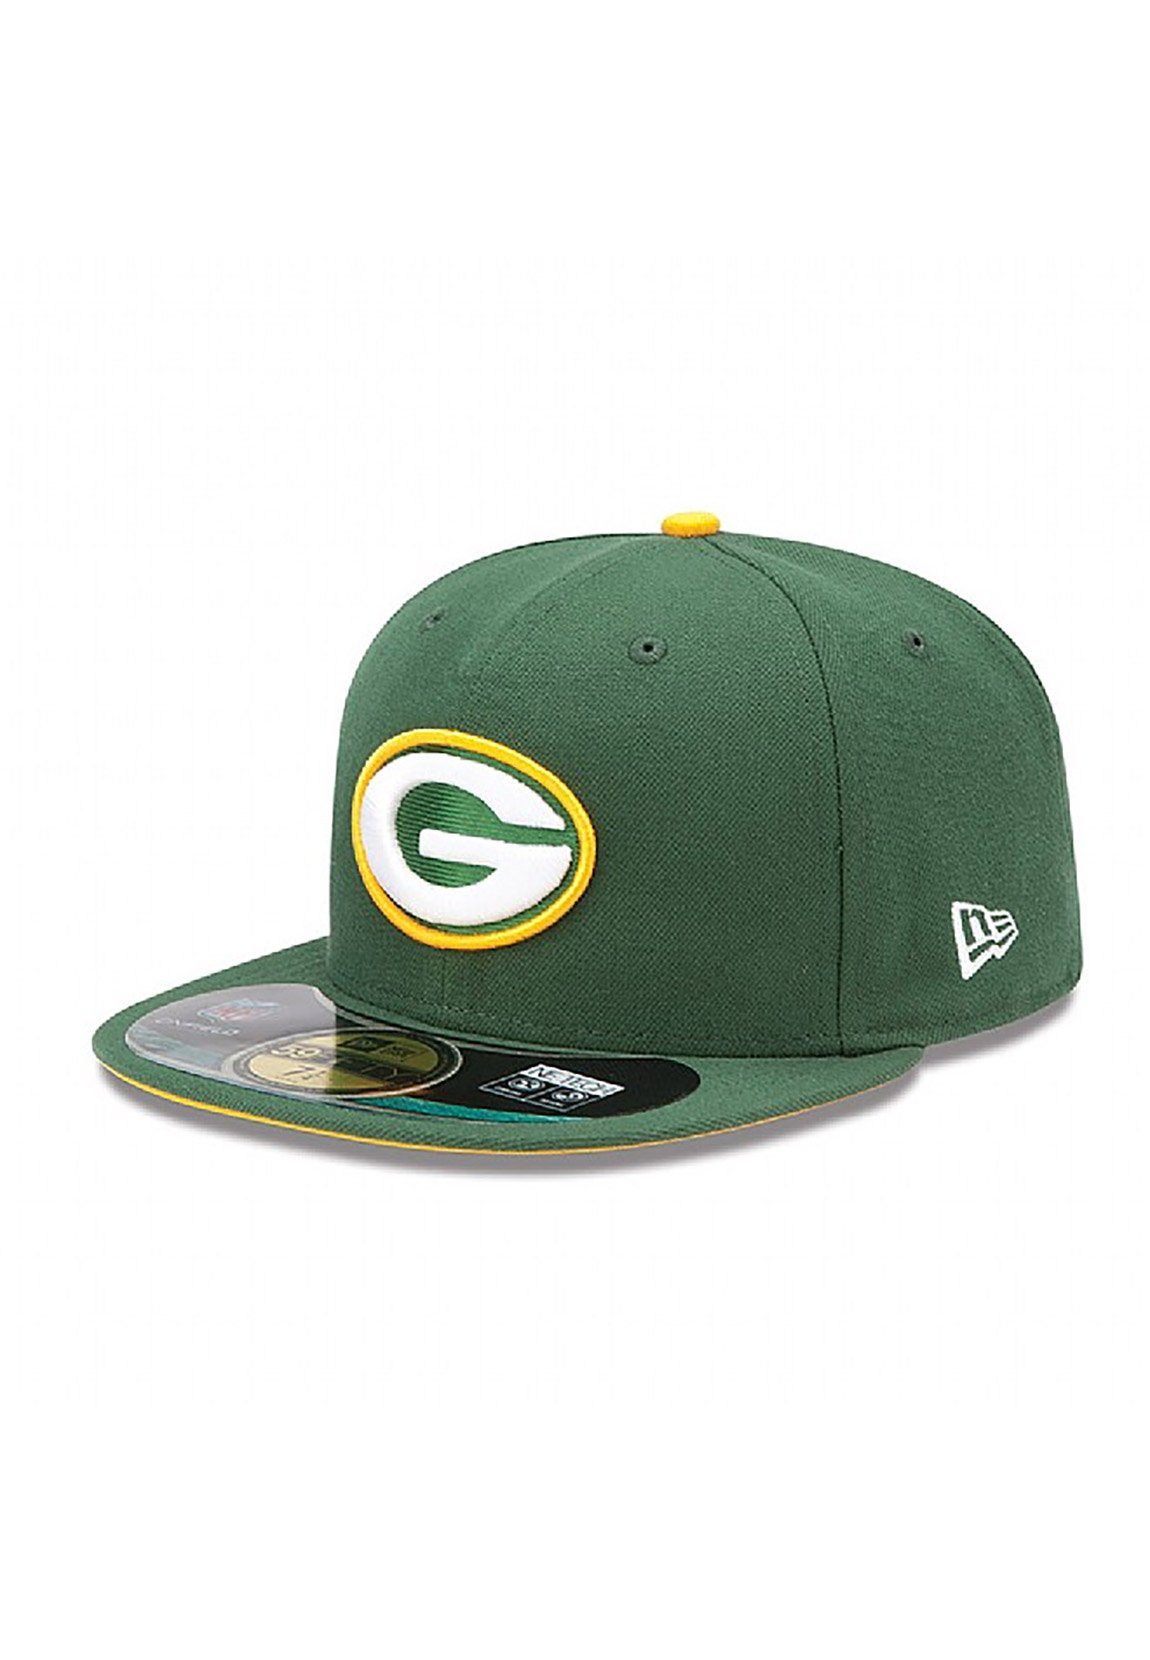 New Era Fitted Cap New Era NFL On Field Cap - GREEN BAY PACKERS - Green